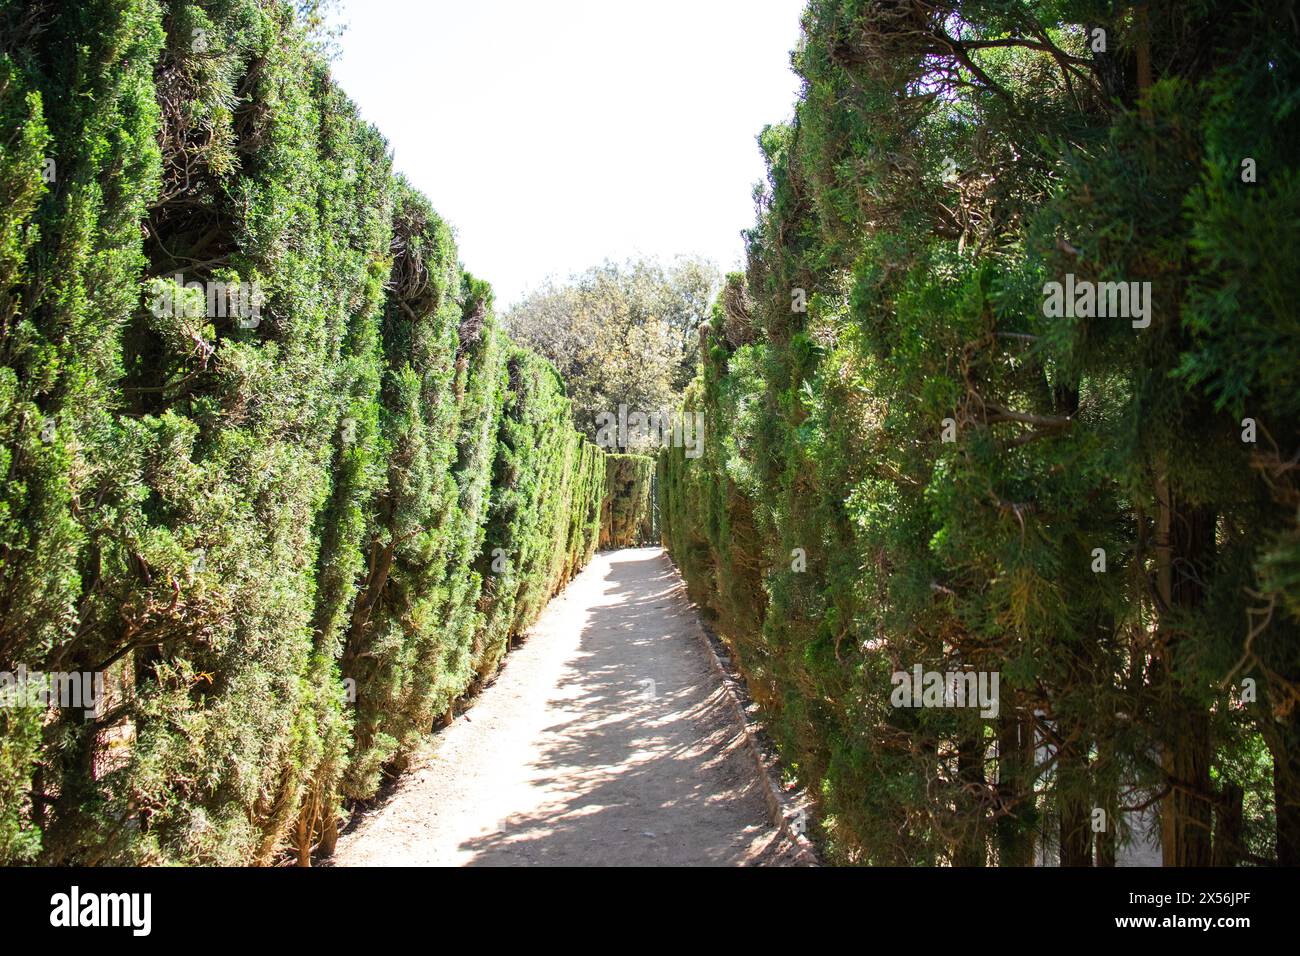 Neoclassical historical garden Parc del Laberint d'Horta,Barcelona,Spain,Sustainability,conserving the environment,Protecting biodiversity Stock Photo